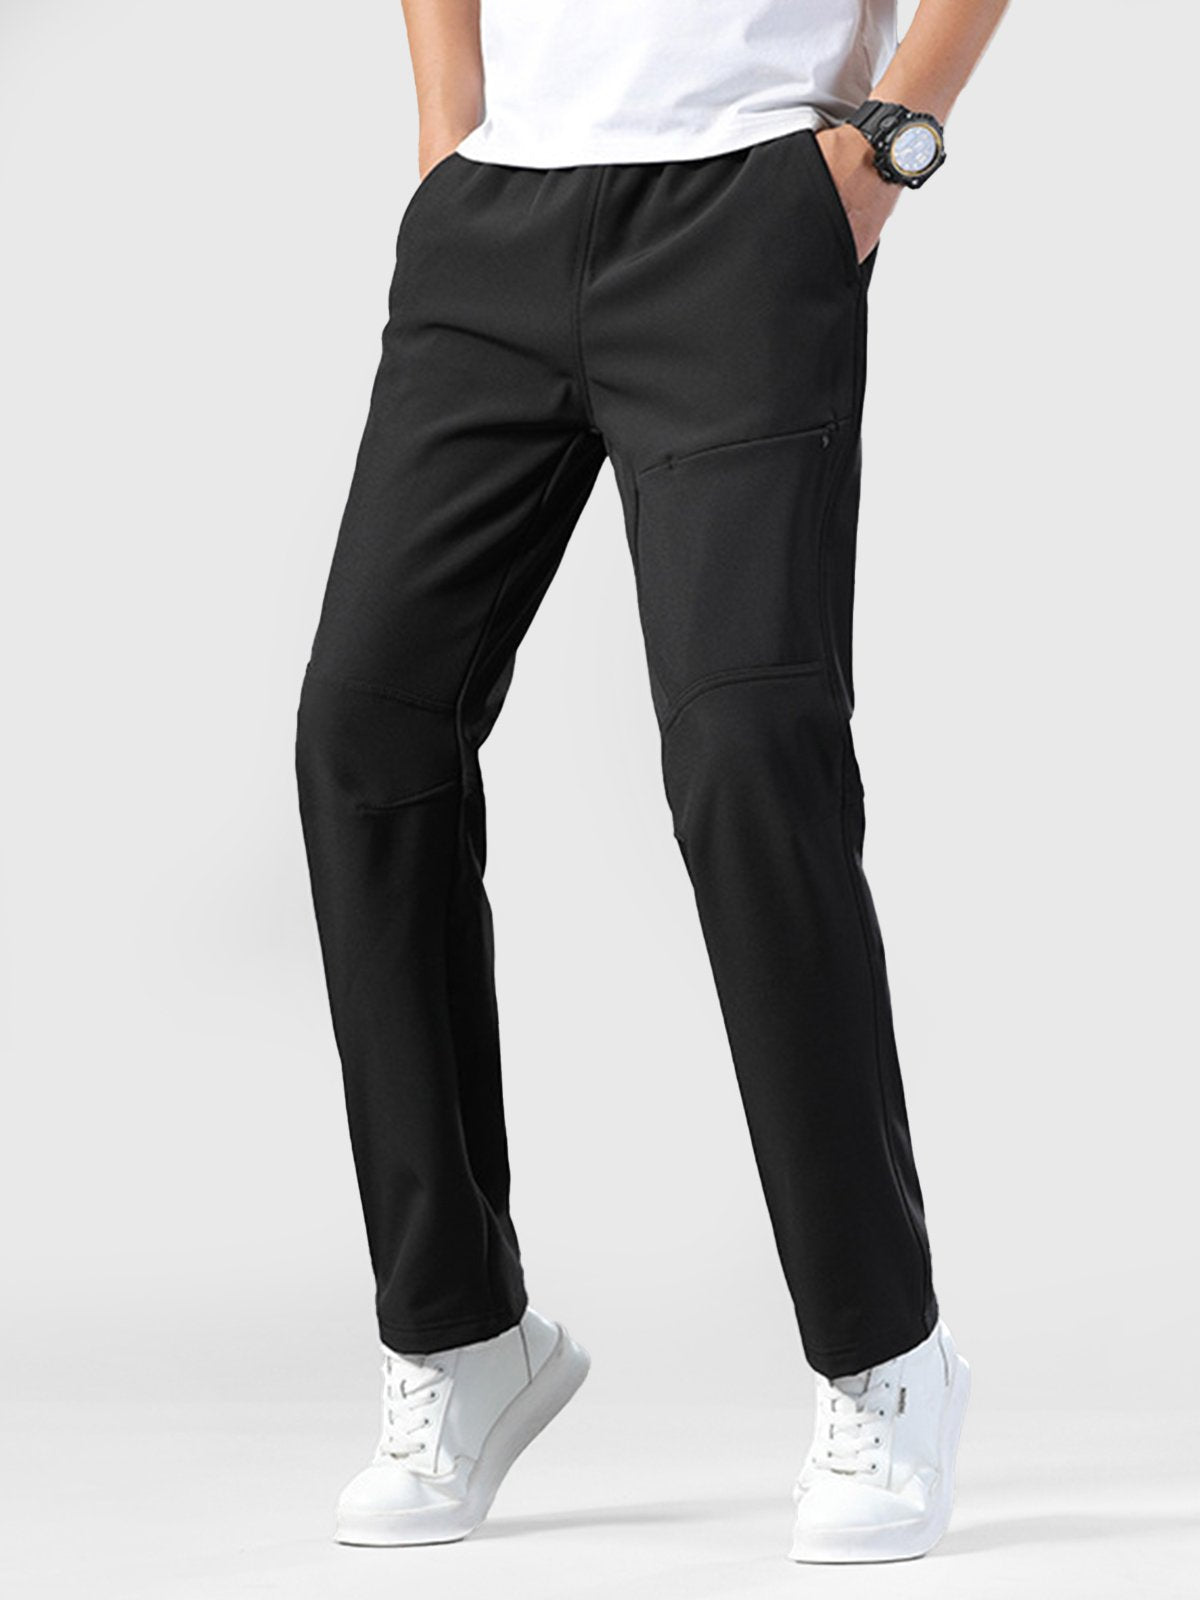 M's Active Fit Softshell Pants-Zittor